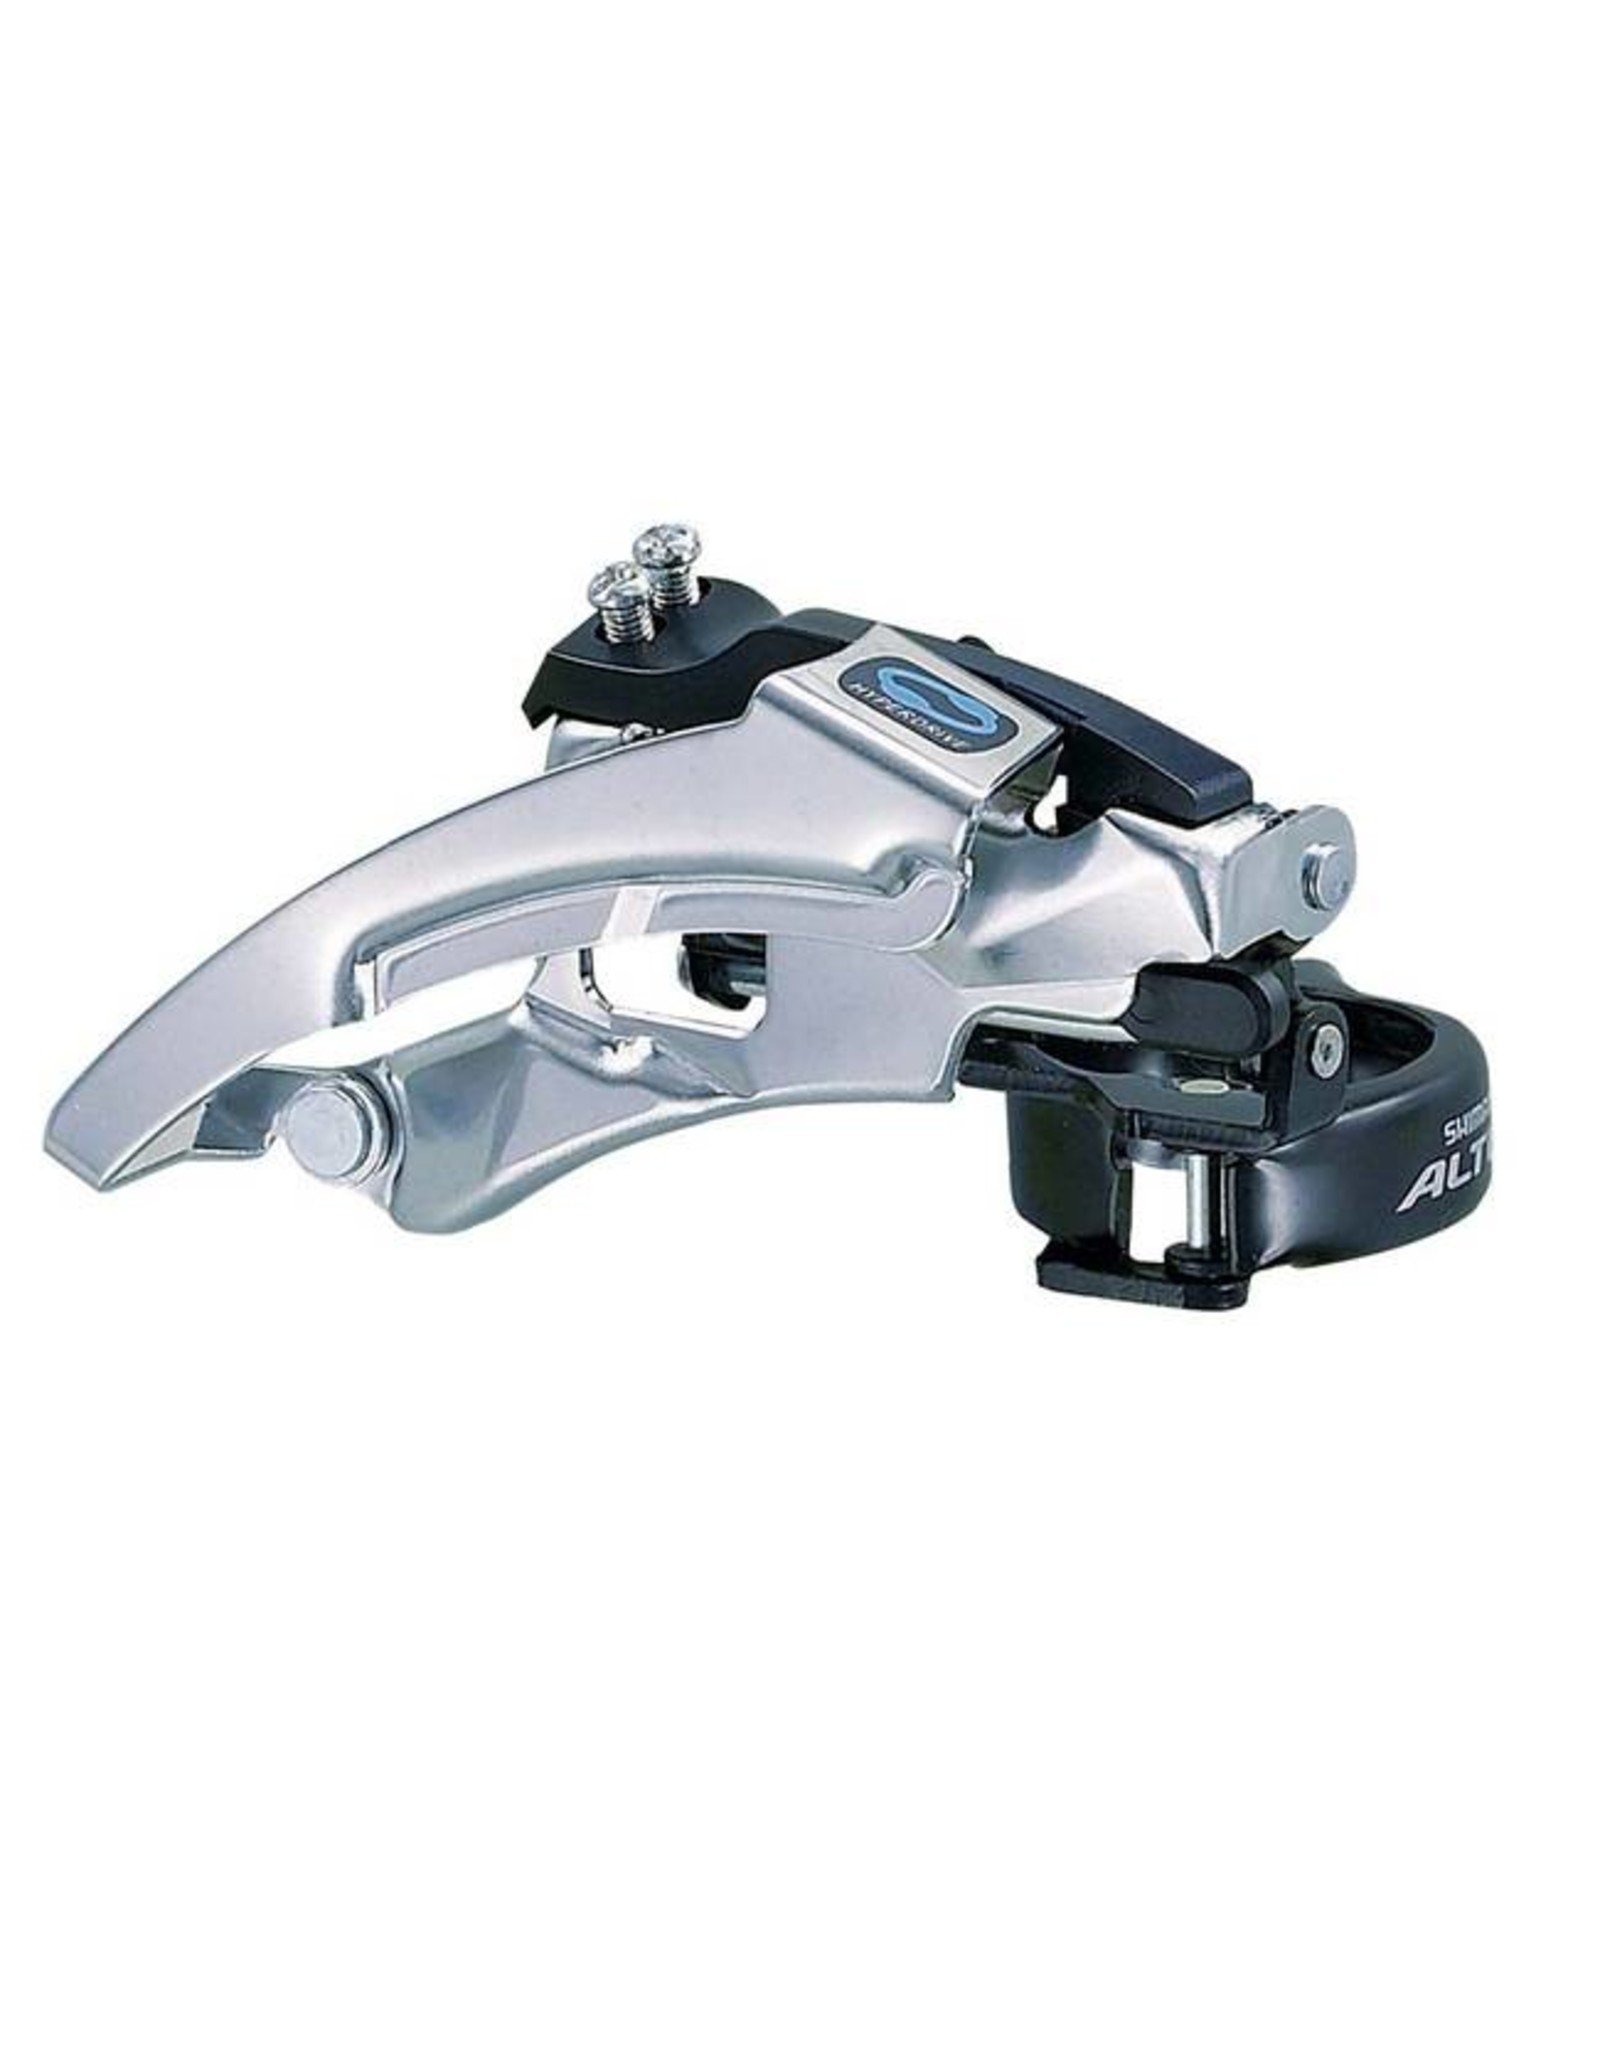 SHIMANO Shimano Altus Front Derailleur FD-M310, Top-Swing Dual-Pull Band-Type, 66-69 degree mount angle